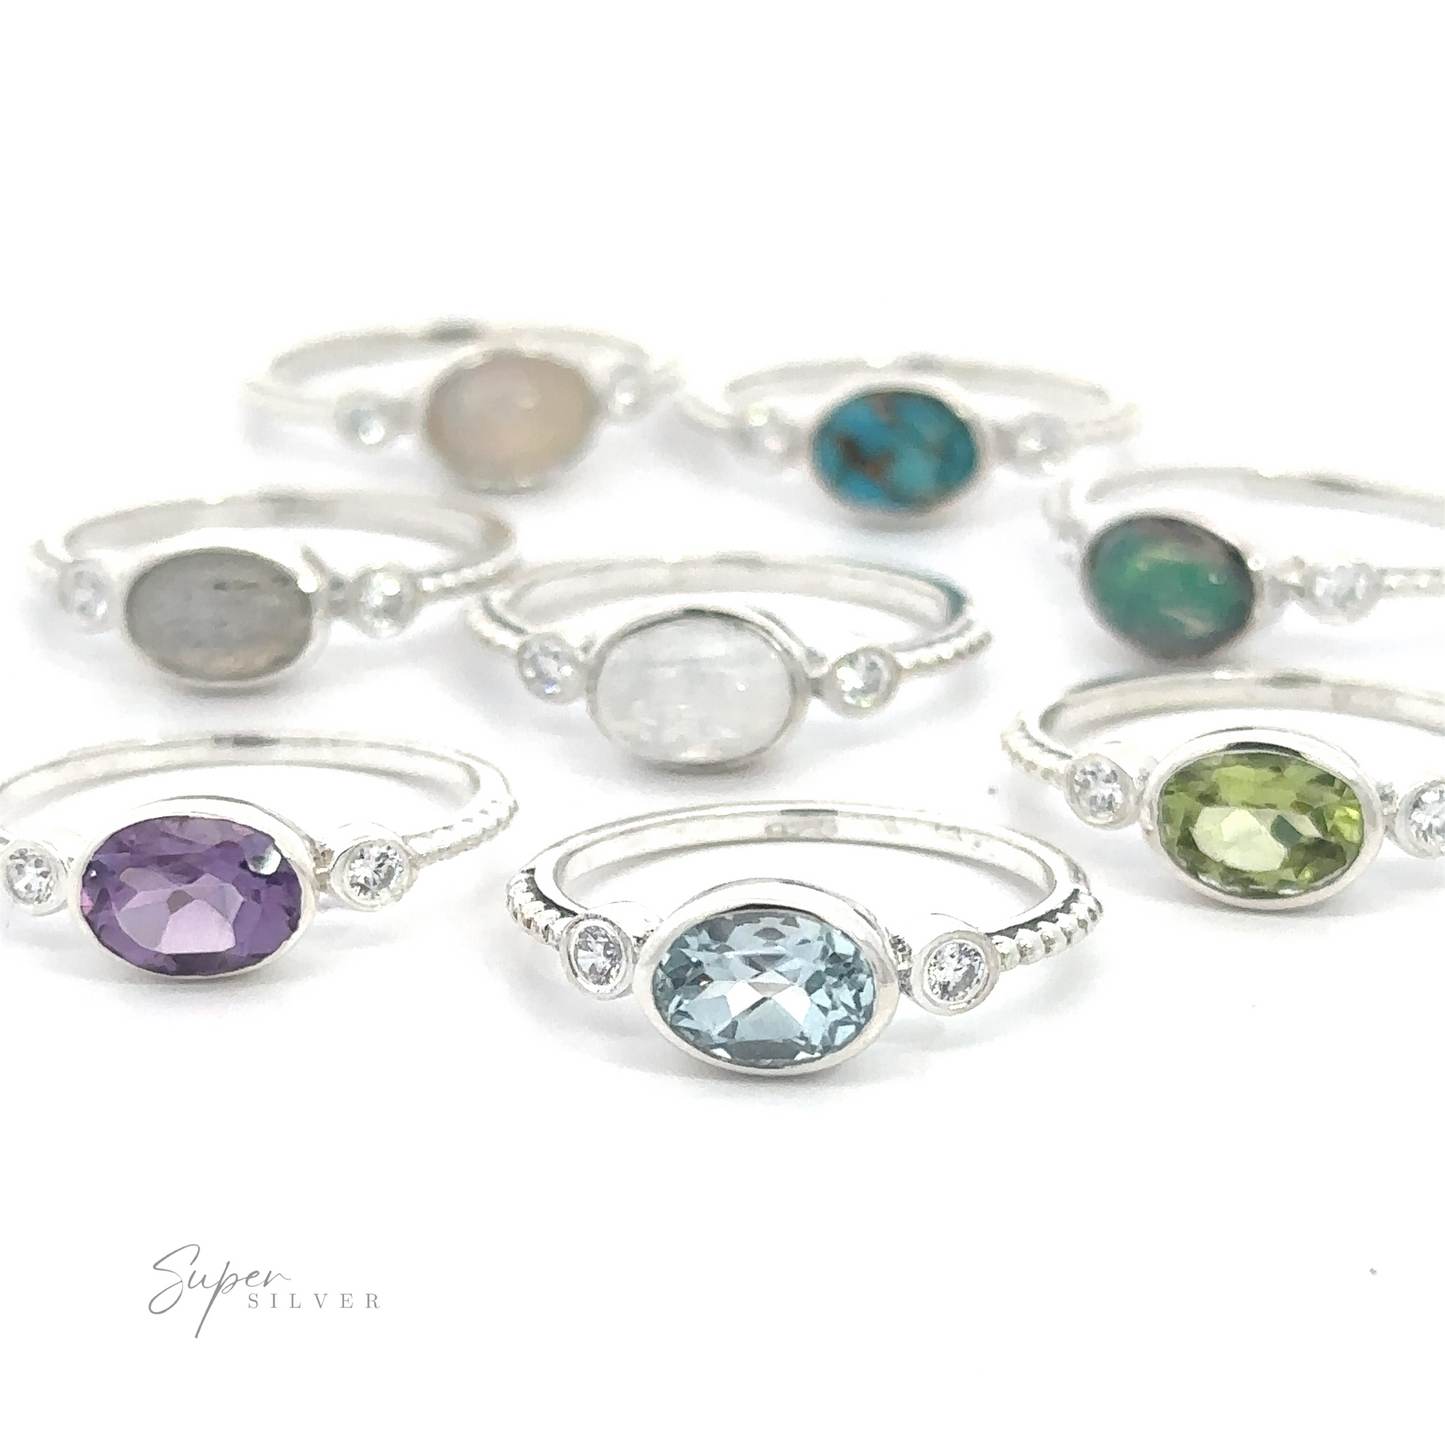 An assortment of handcrafted Horizontal Oval Gemstone Rings with Beaded Bands, displayed on a white surface.